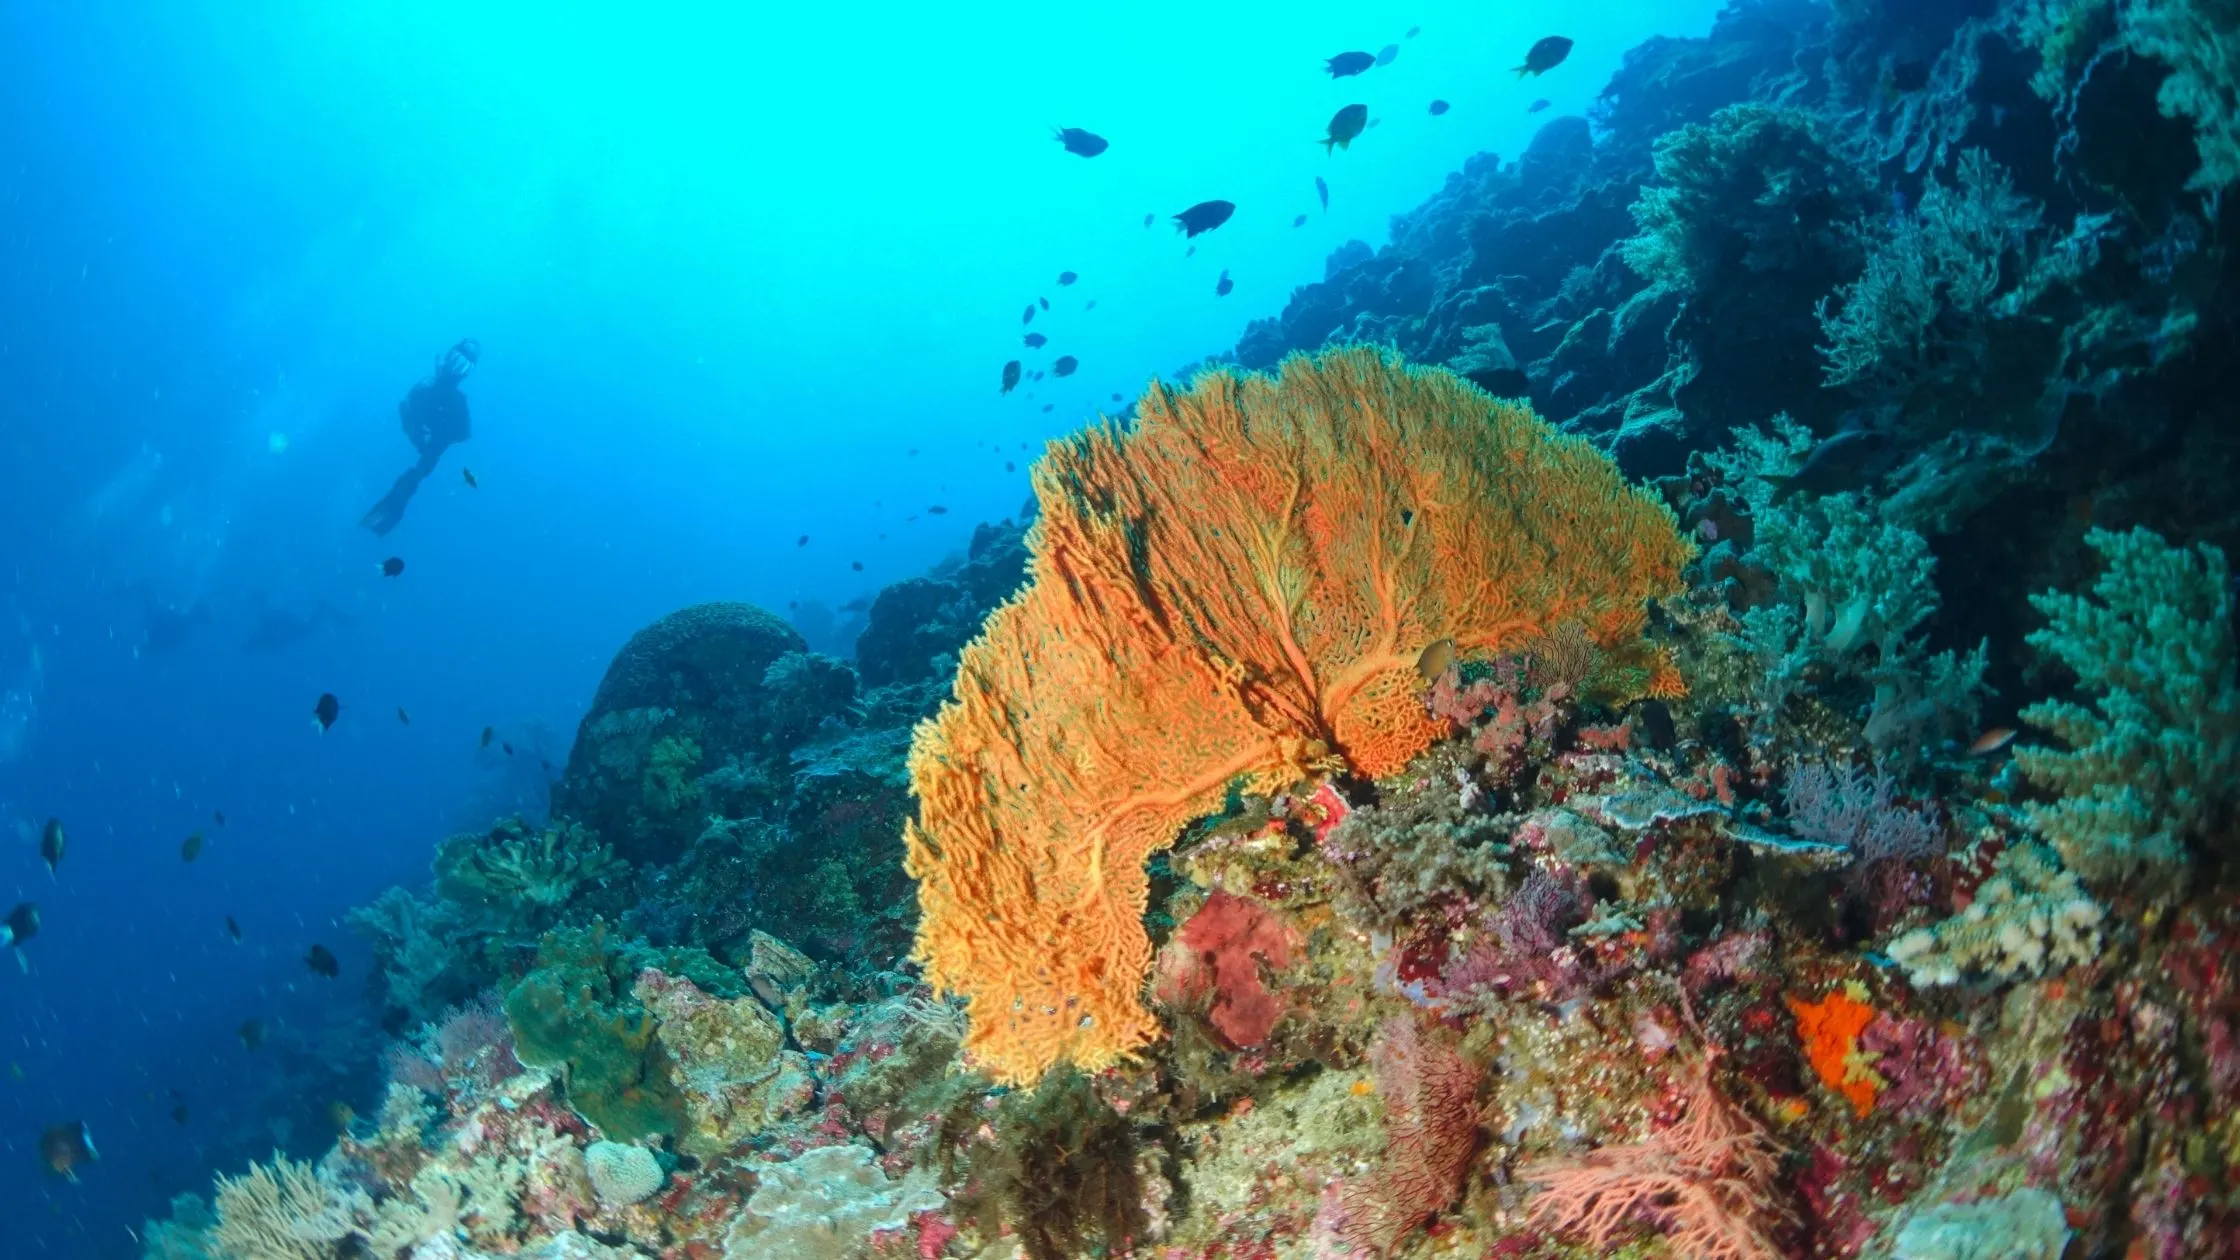 A picture of coral in the Tubbataha reef.